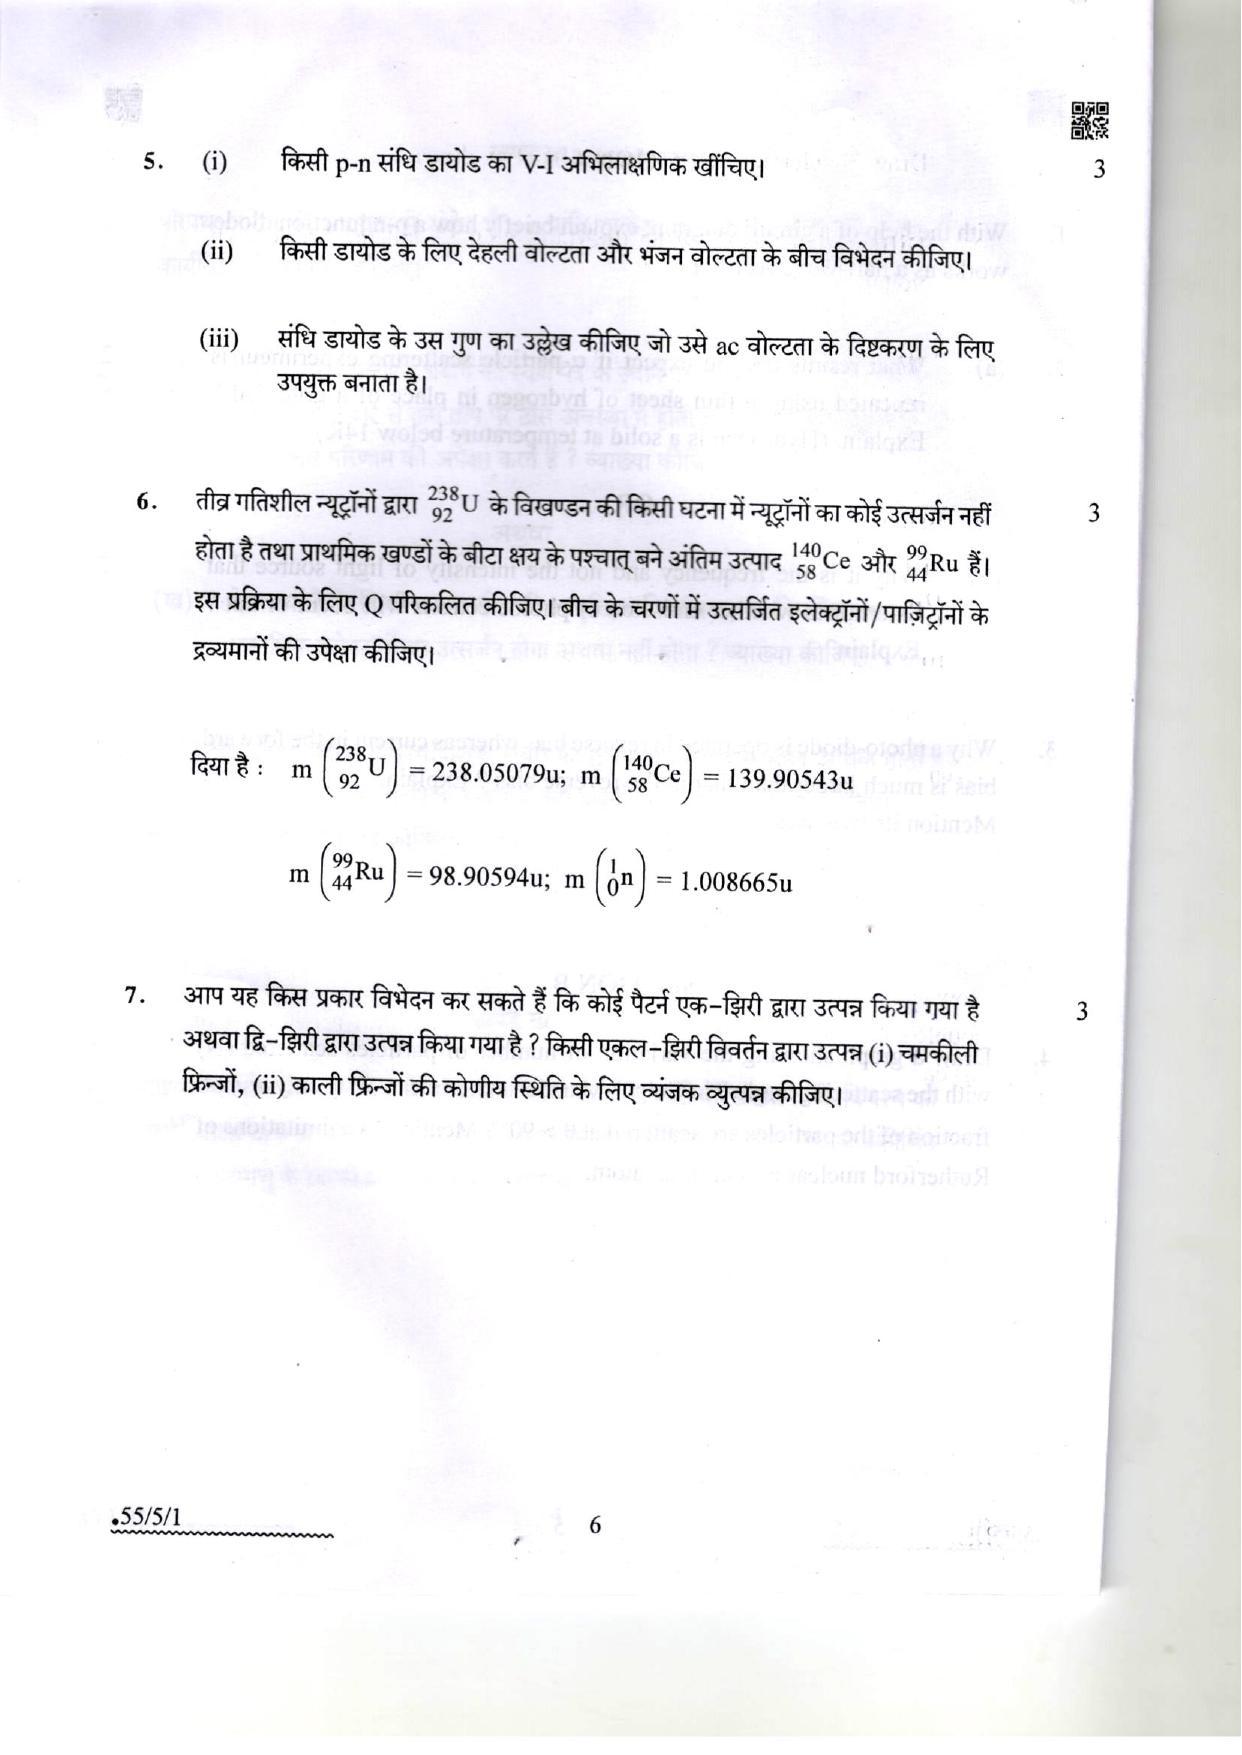 CBSE Class 12 55-5-1 Physics 2022 Question Paper - Page 6